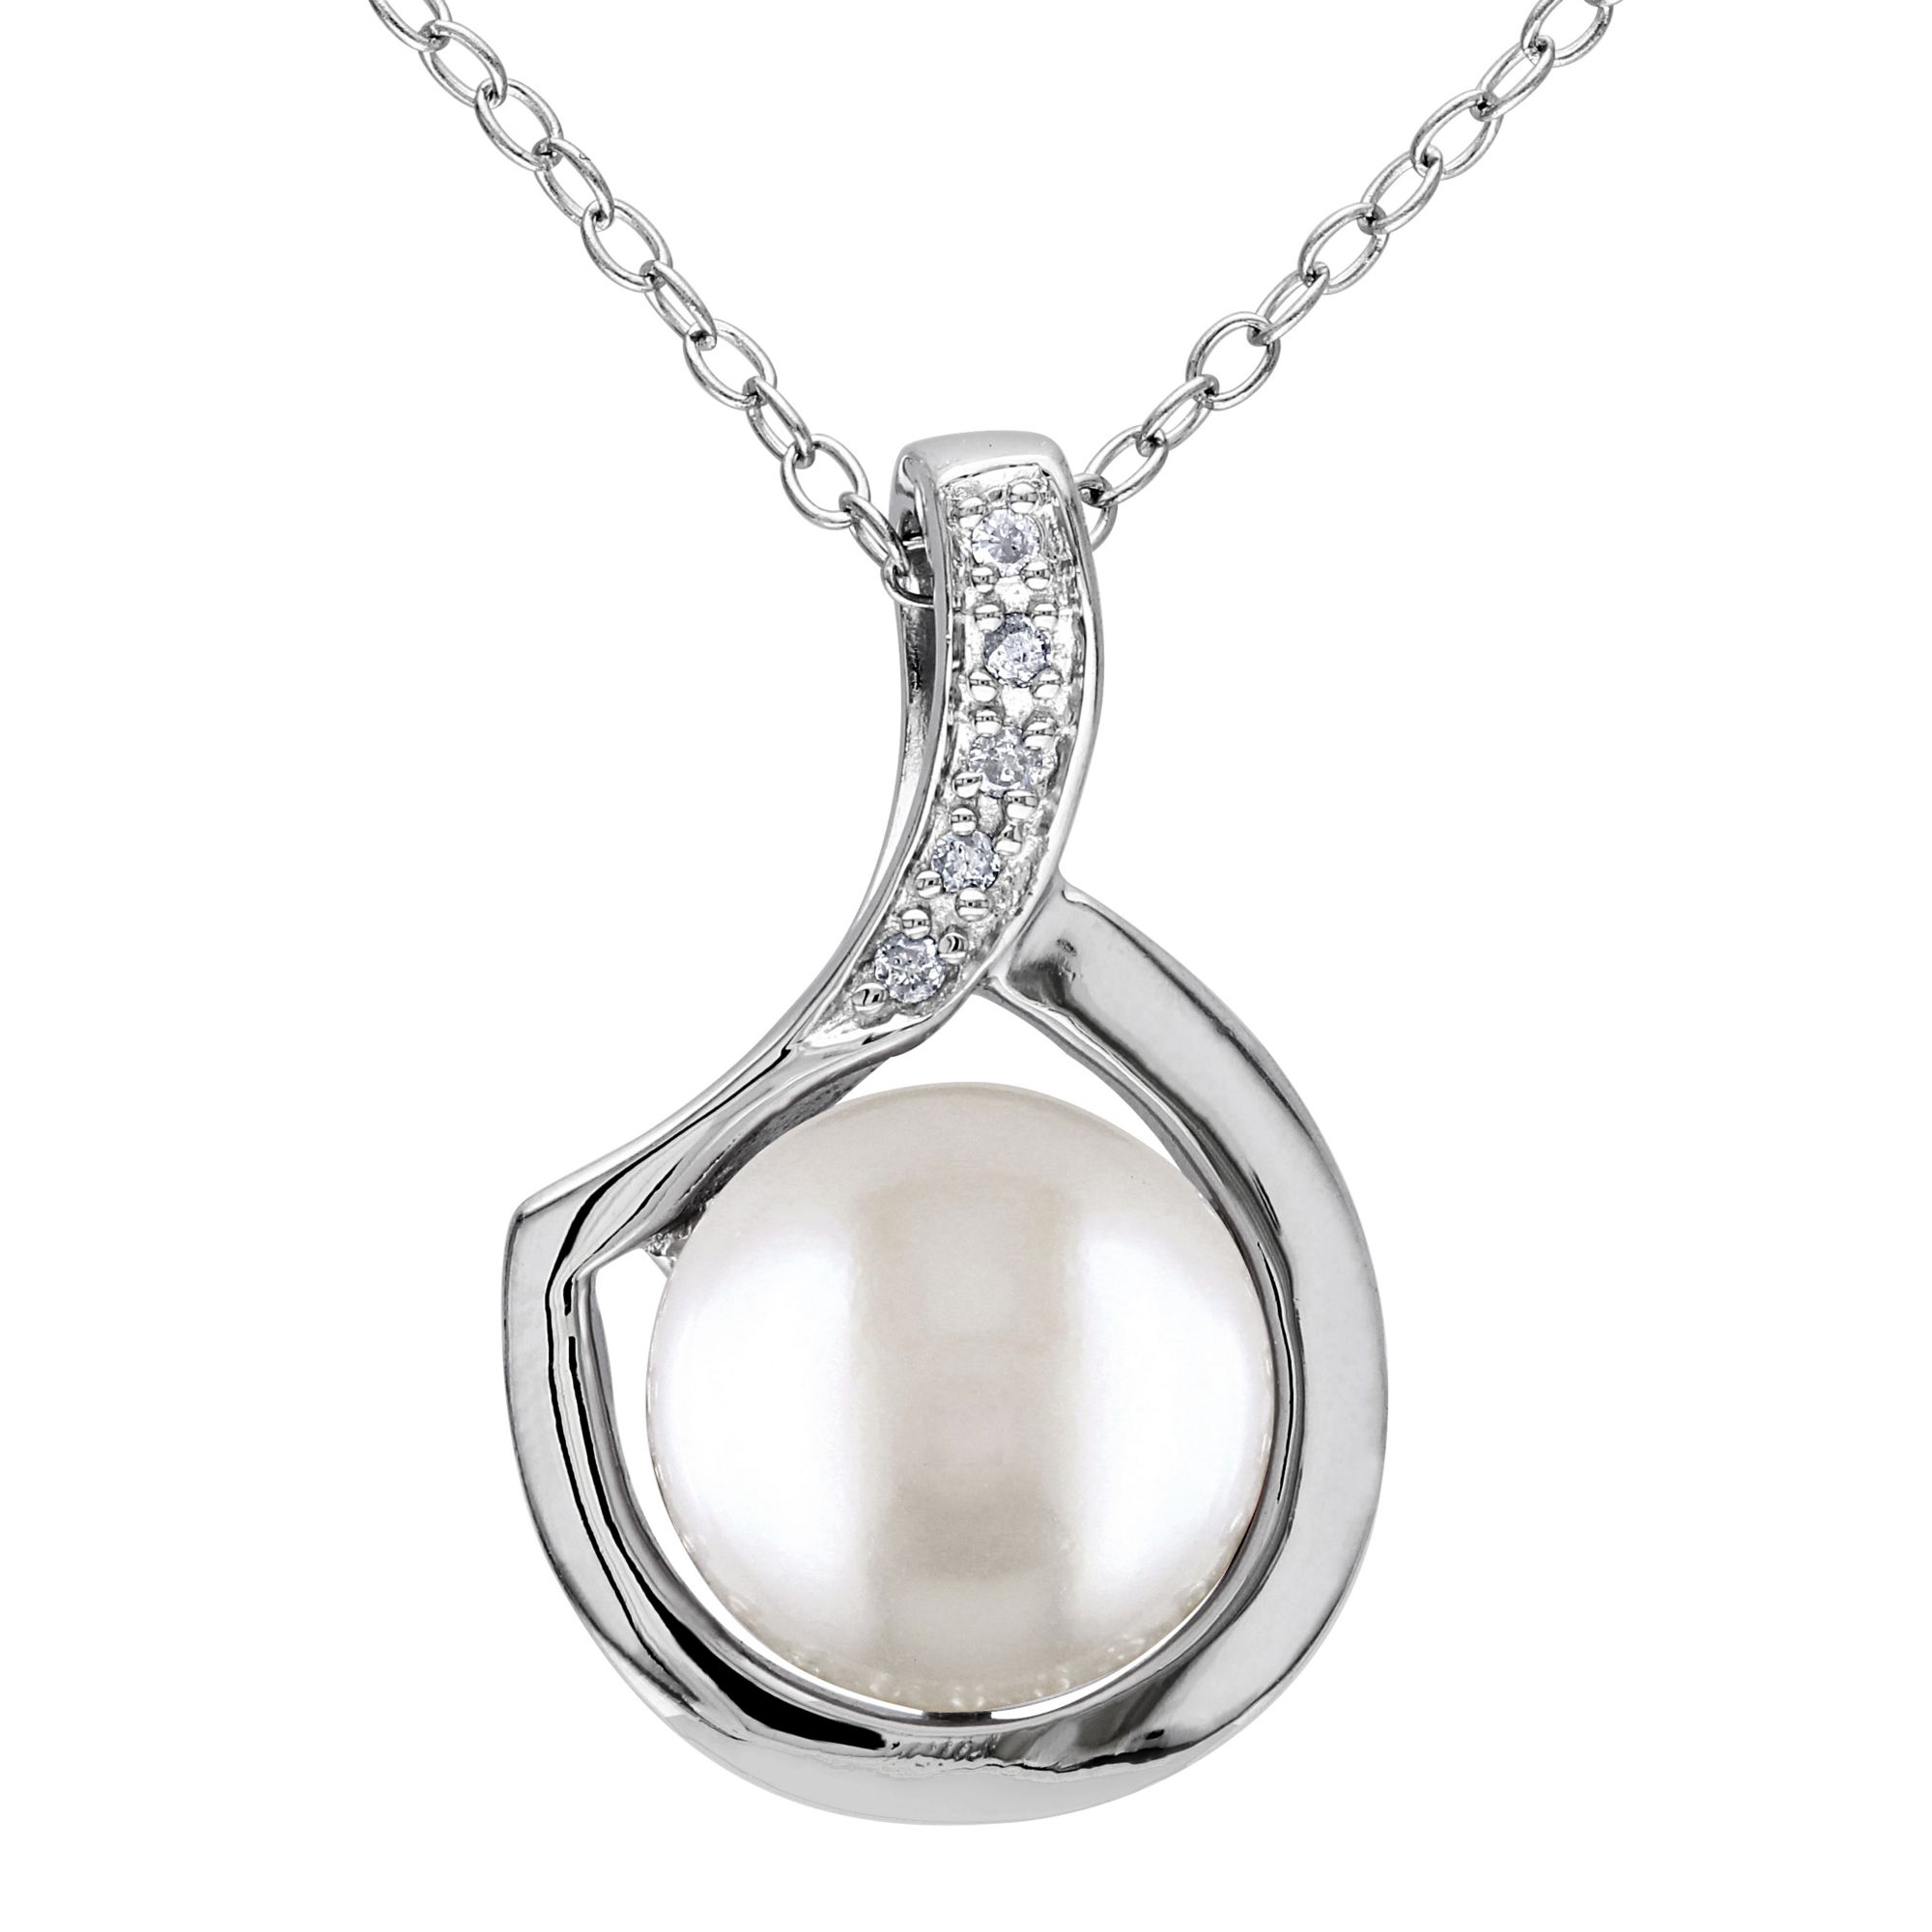 9-9.5 mm Cultured Freshwater Pearl and Diamond Necklace in Sterling Silver